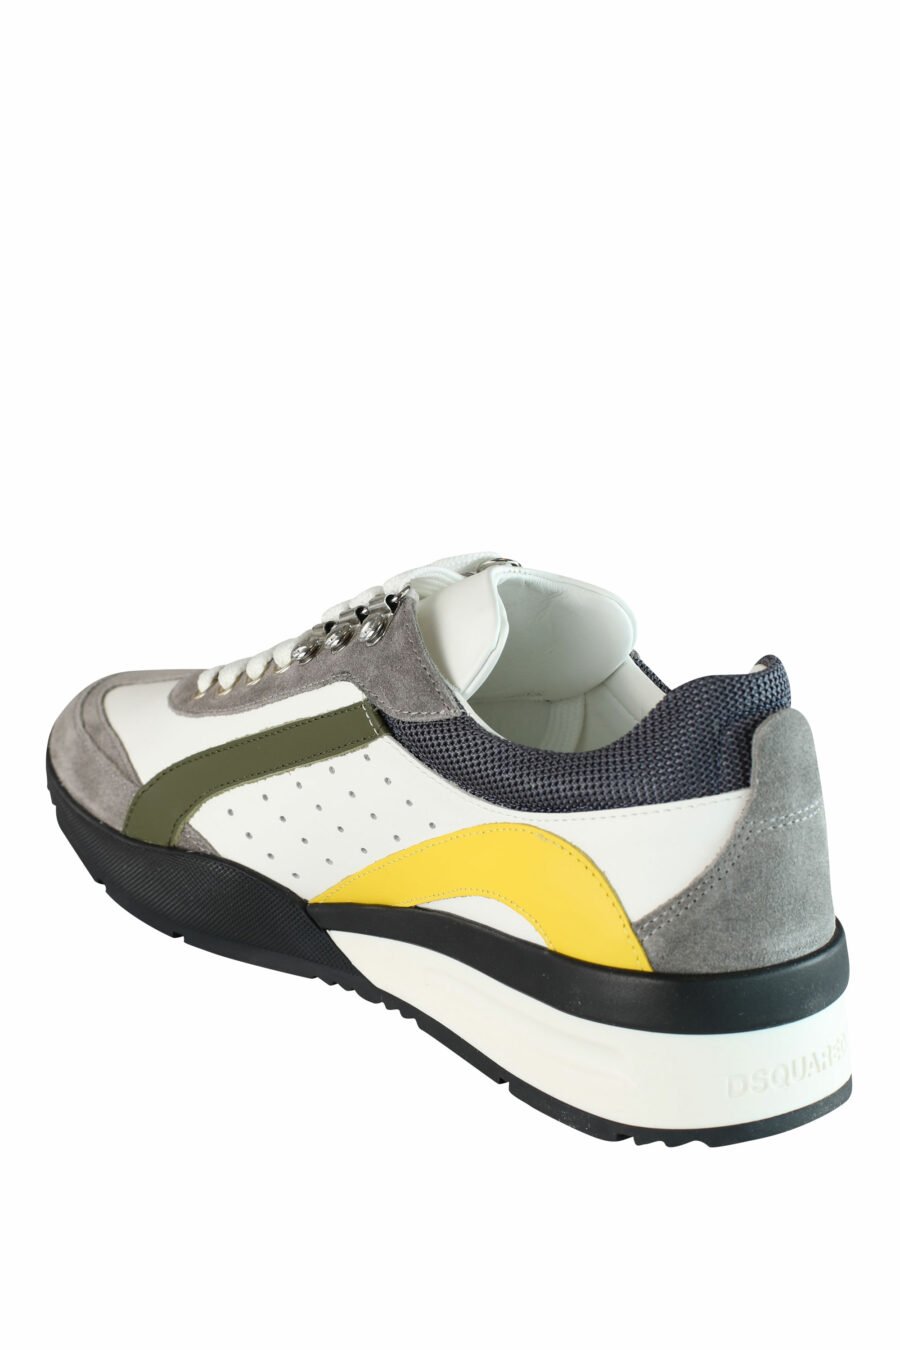 Original legend" multicoloured trainers with white and logo - IMG 1390